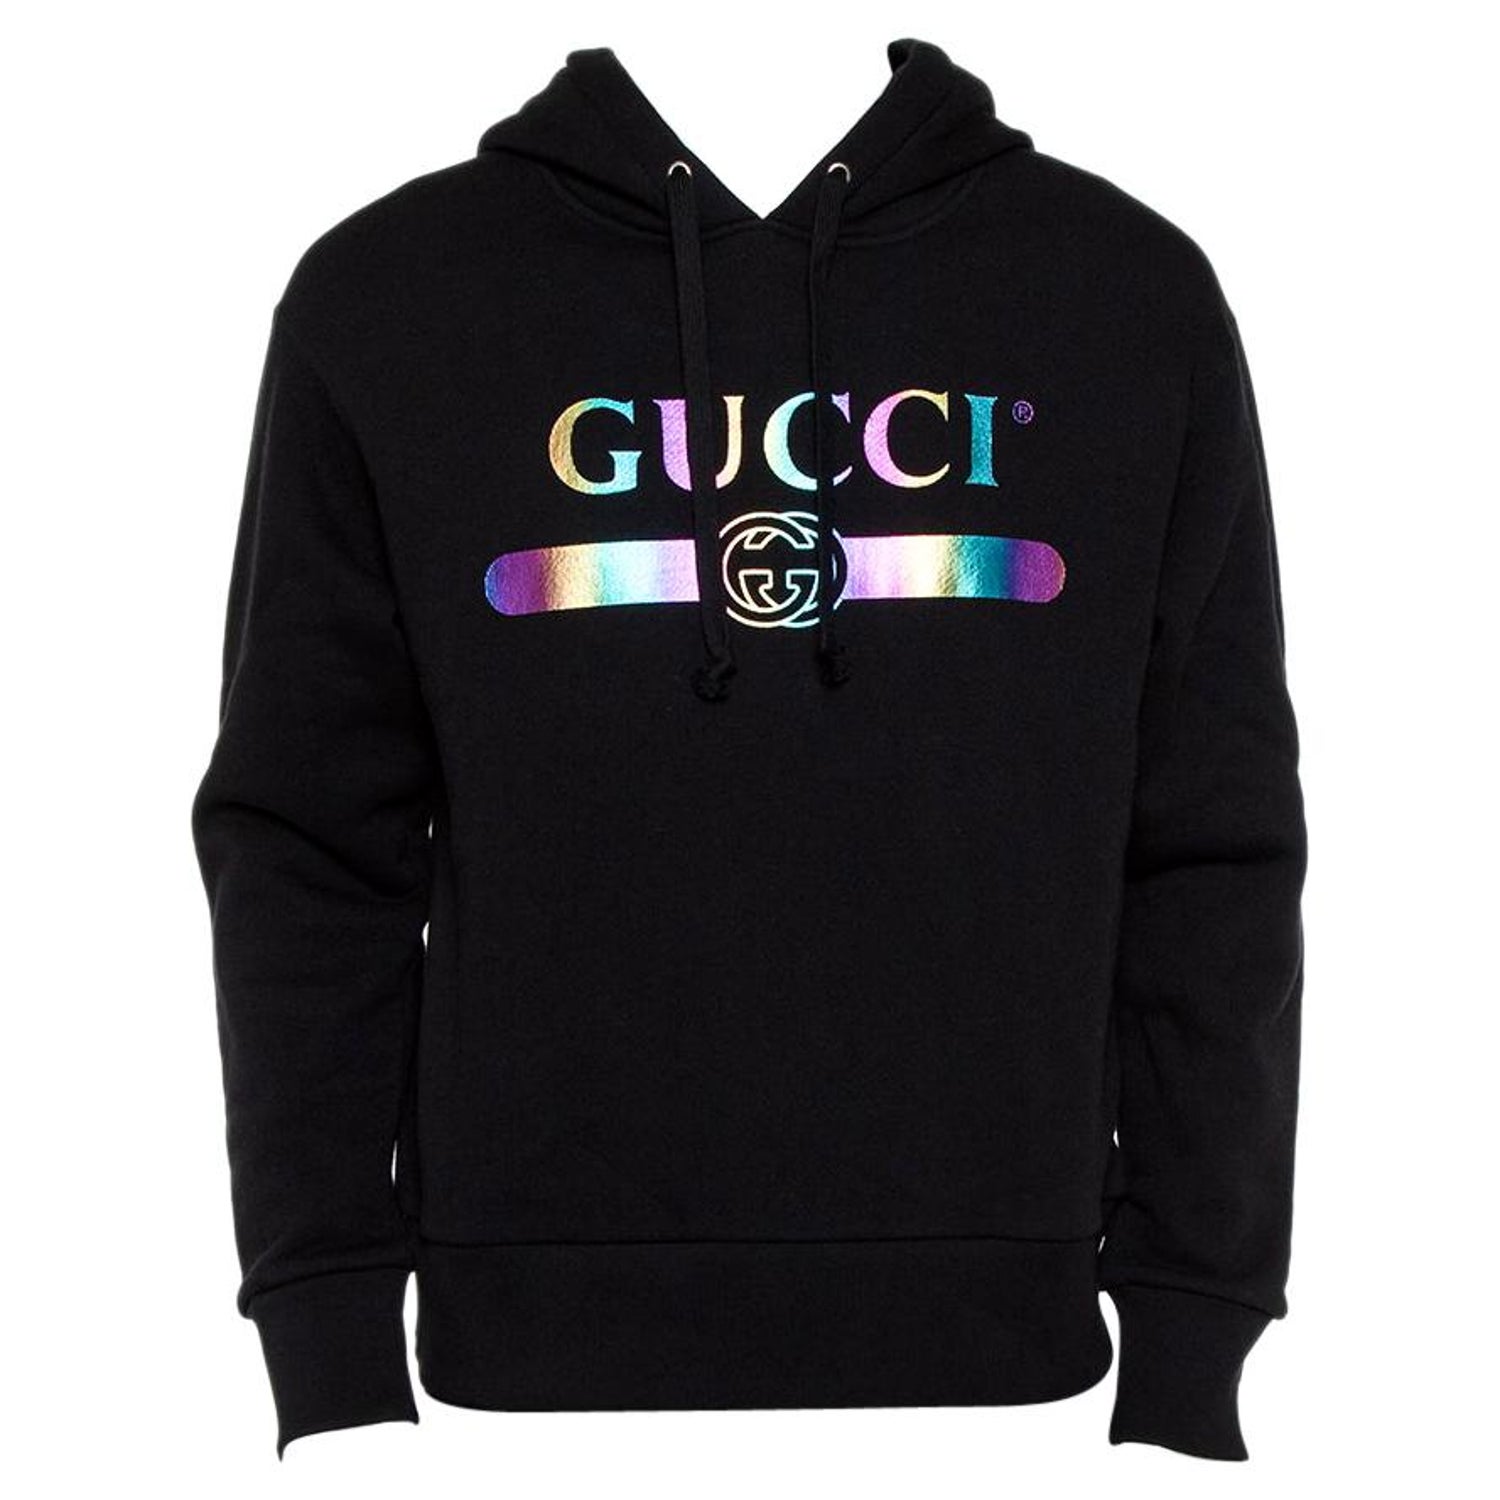 Holographic Gucci - 6 For Sale on 1stDibs